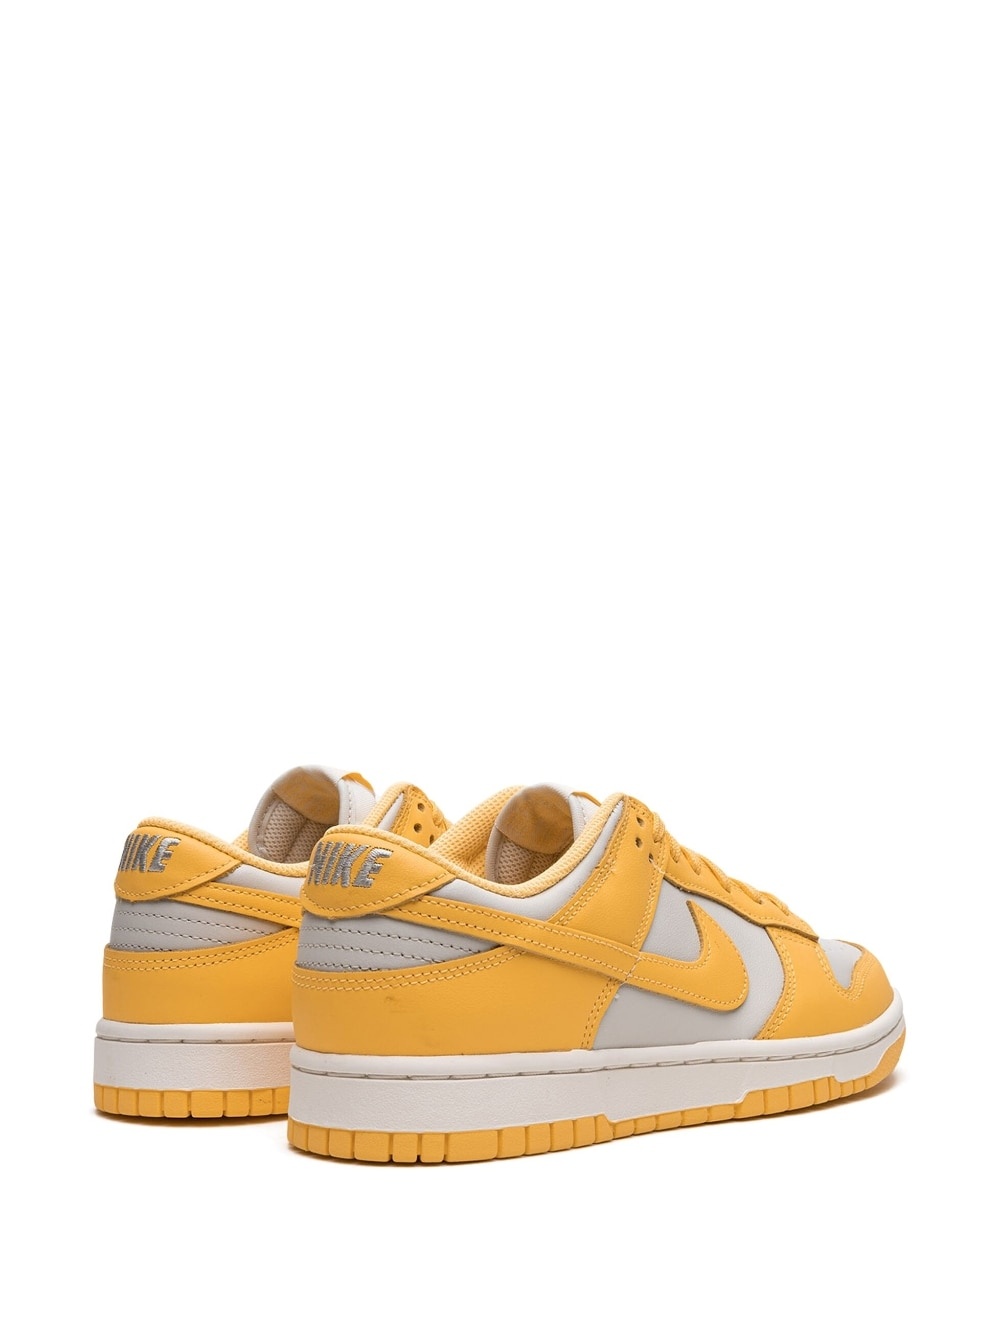 Dunk Low "Citron Pulse" sneakers - 3